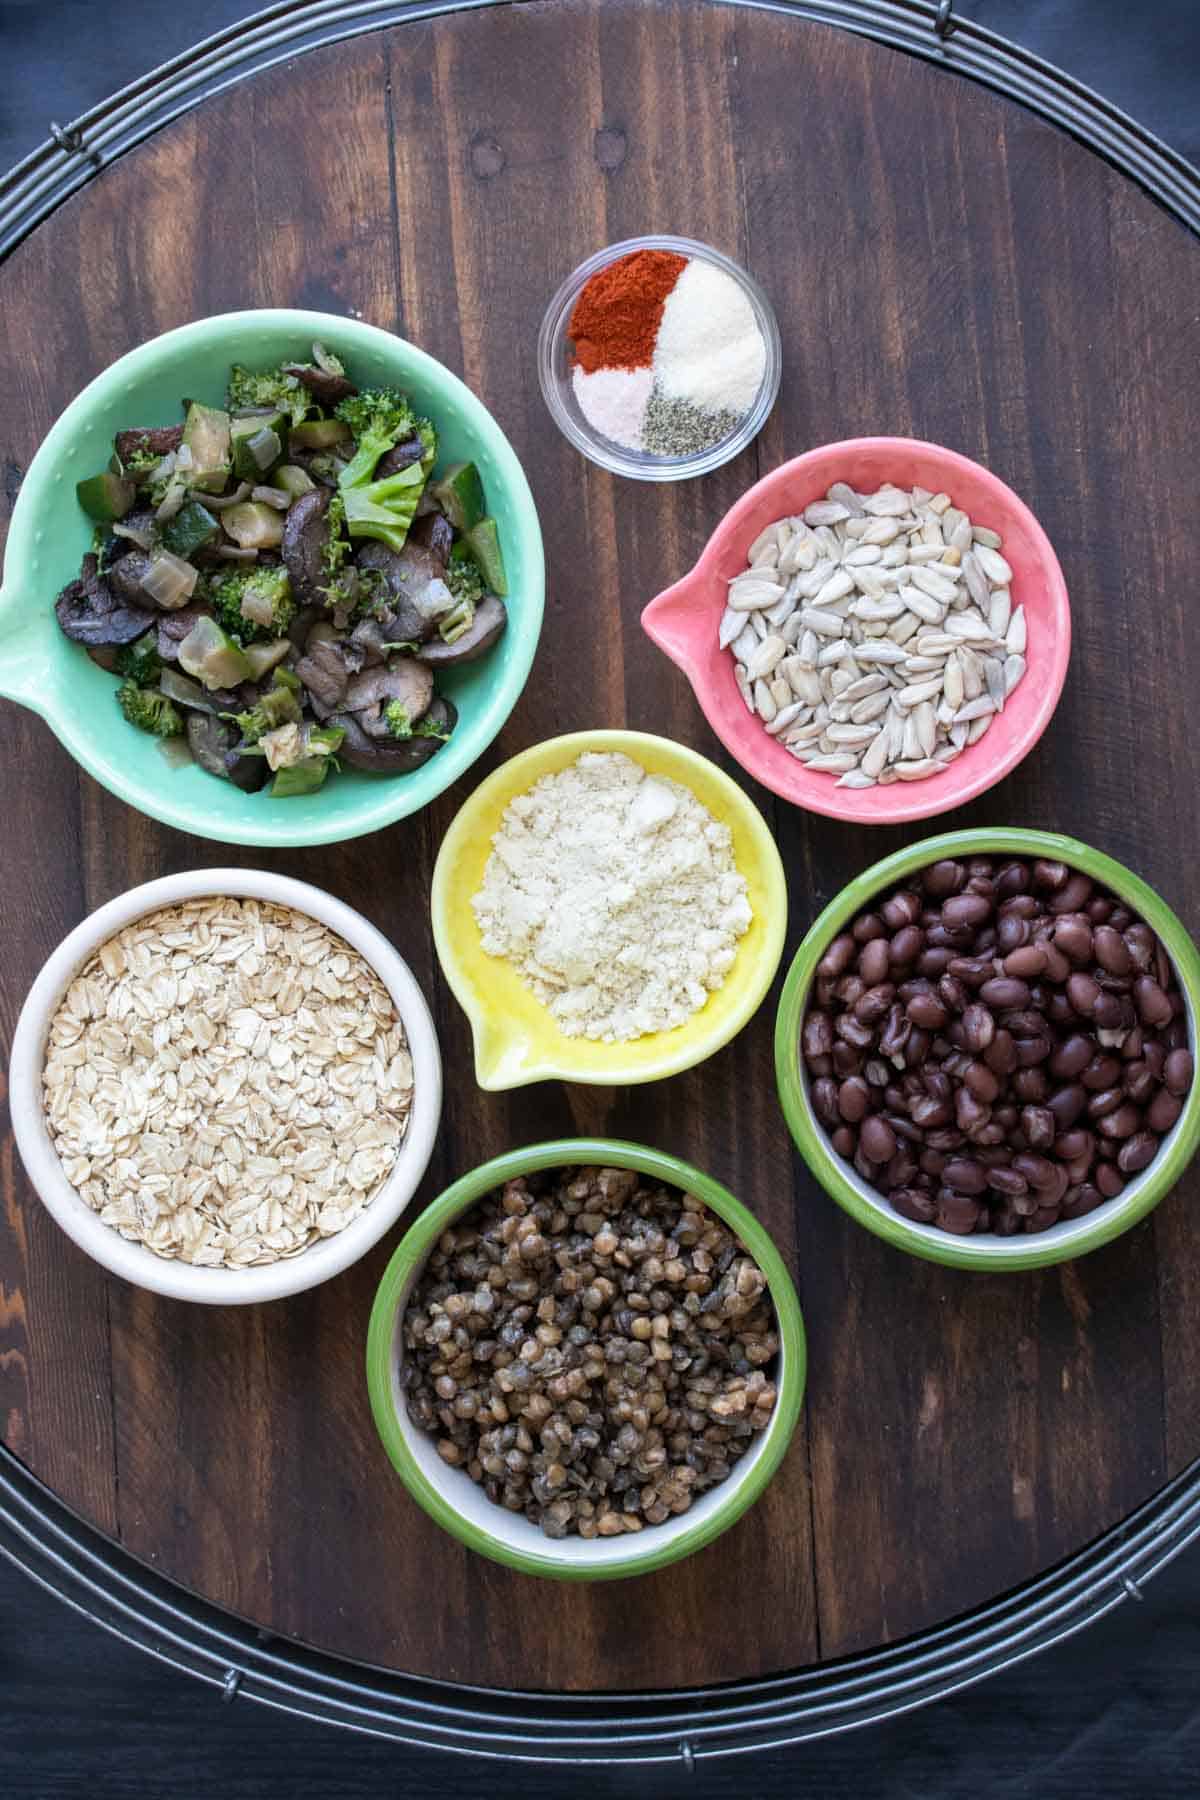 Veggie burger ingredients in colorful bowls on a wooden table